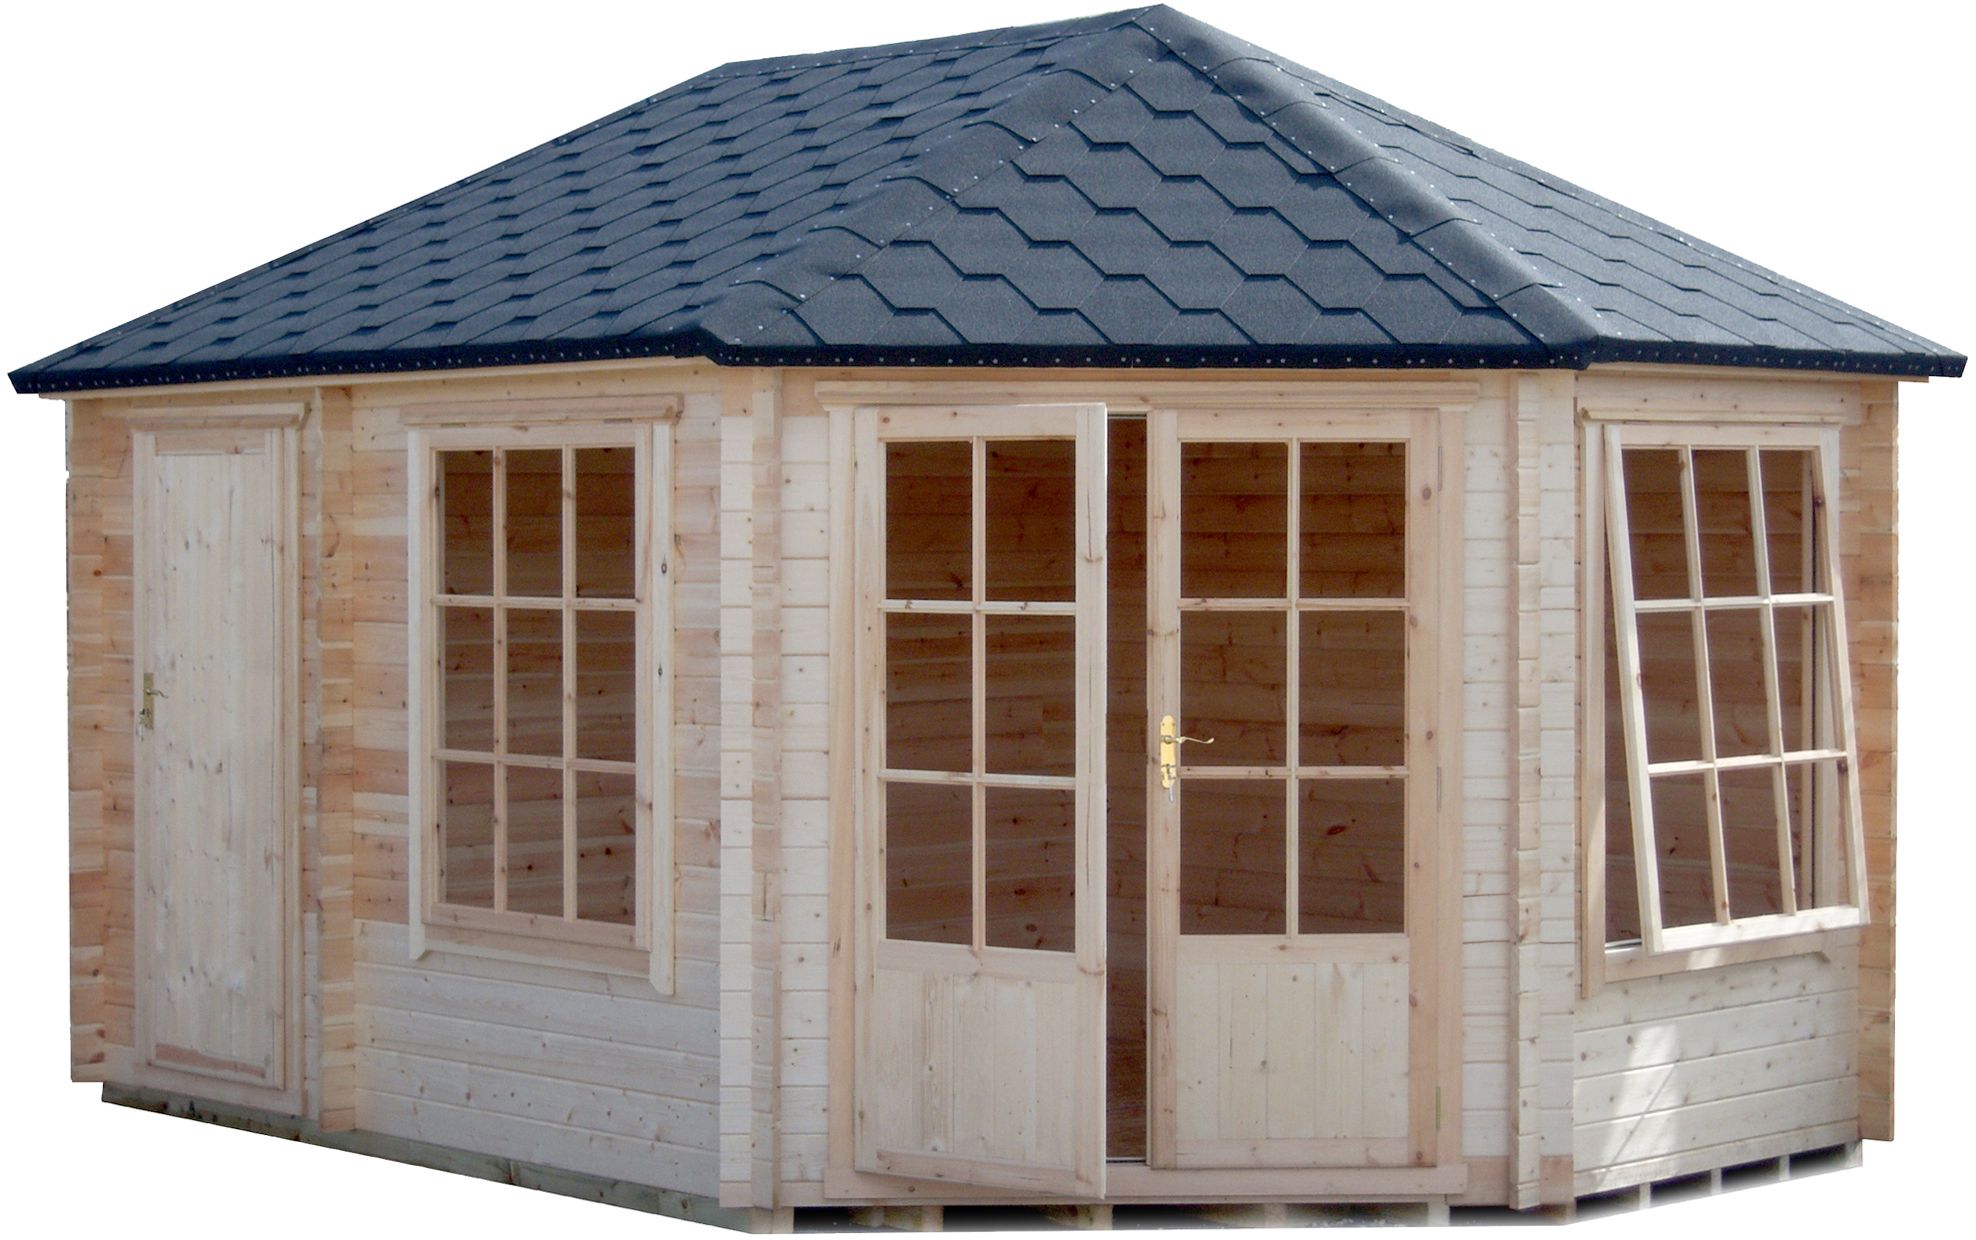 Shire Leygrove 14x10 Apex Tongue & groove Wooden Cabin